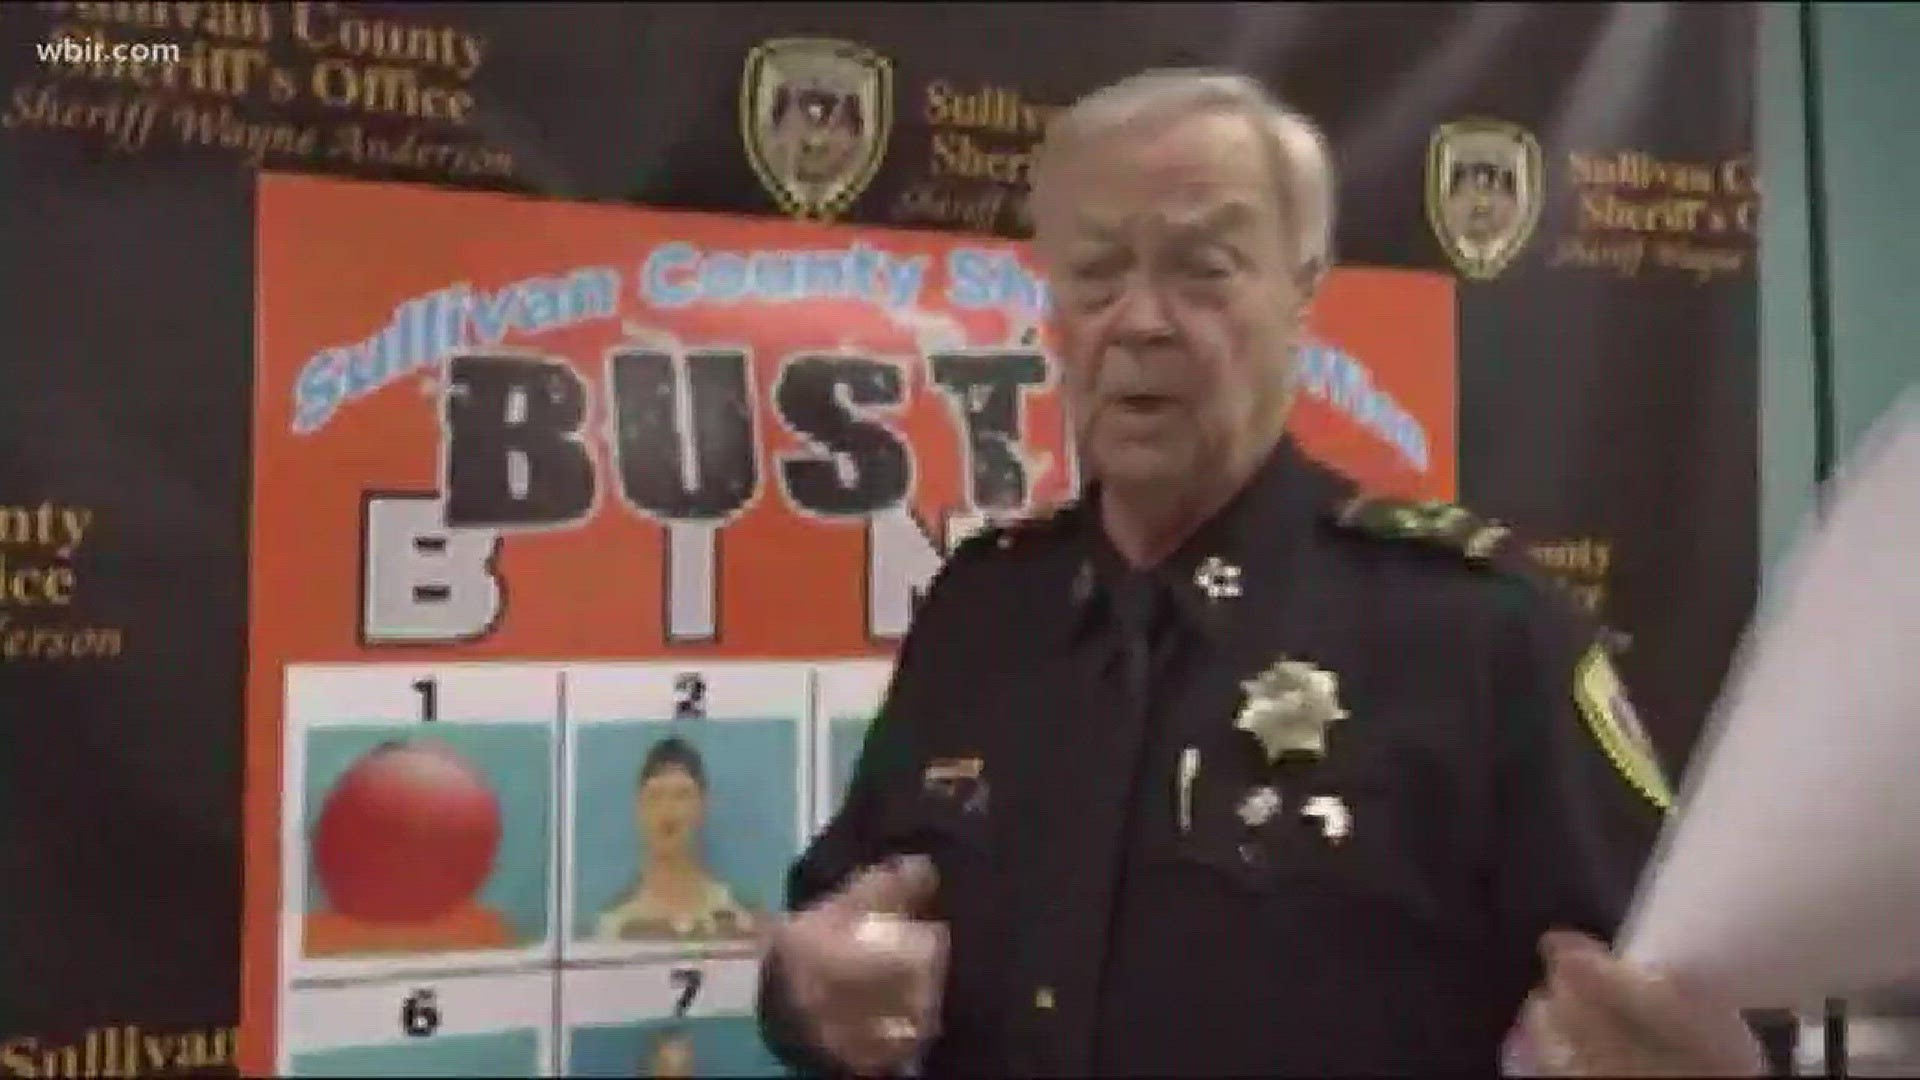 Nov. 24, 2017: The Sullivan County Sheriff's Office share its second episode of "Busted Bingo."